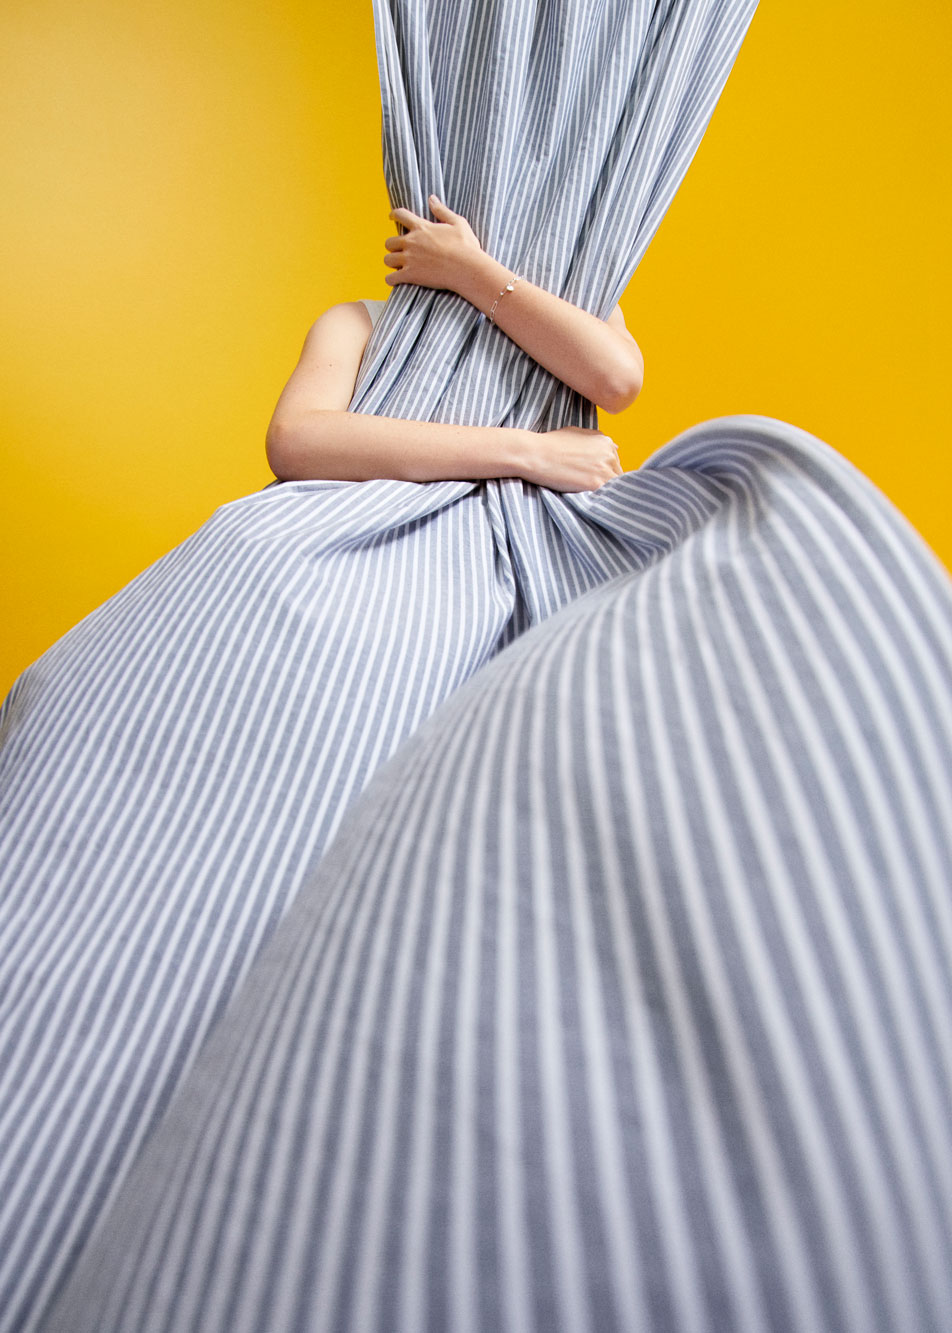 A striped sheet flowing from the ceiling to the floor. A person stands hidden behind it with only their arms showing, wrapped around the sheet. The background is a bright yellow wall.